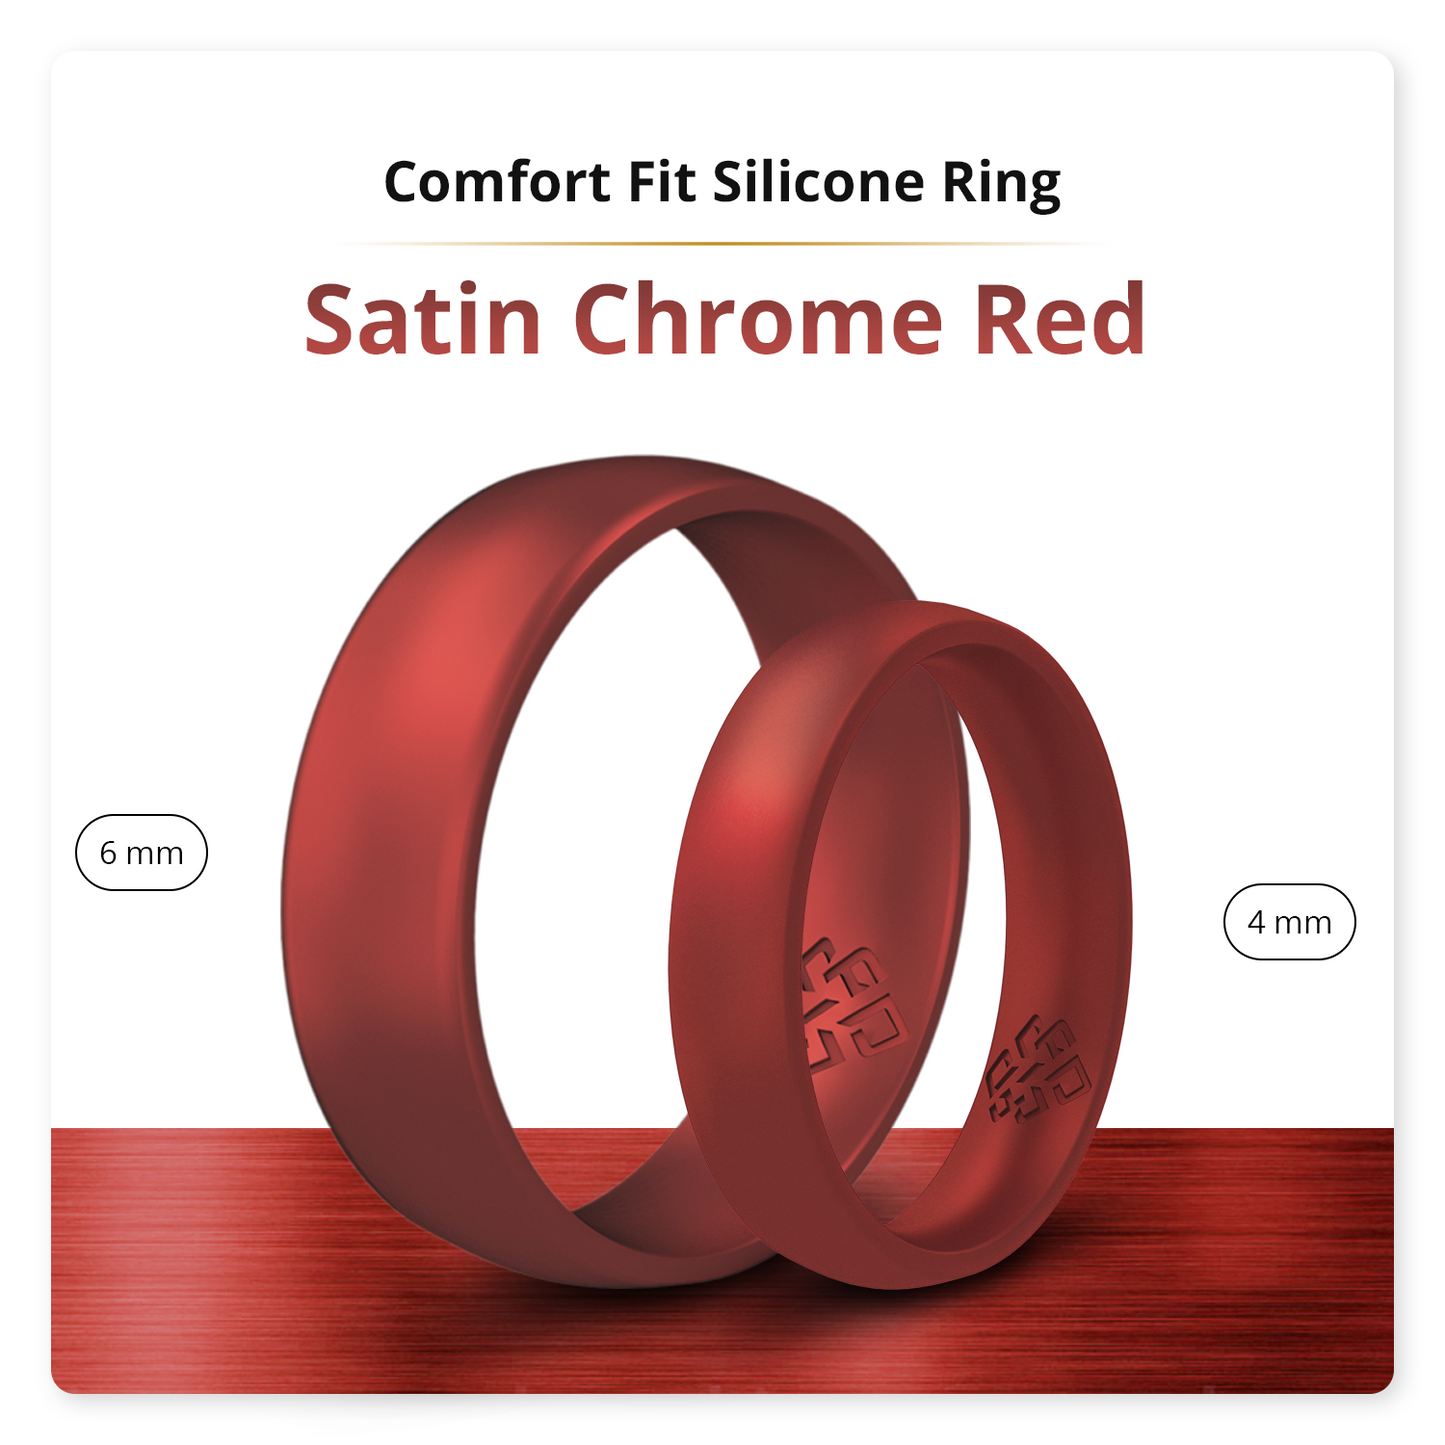 Satin Chrome Red Breathable Silicone Ring for Men and Women